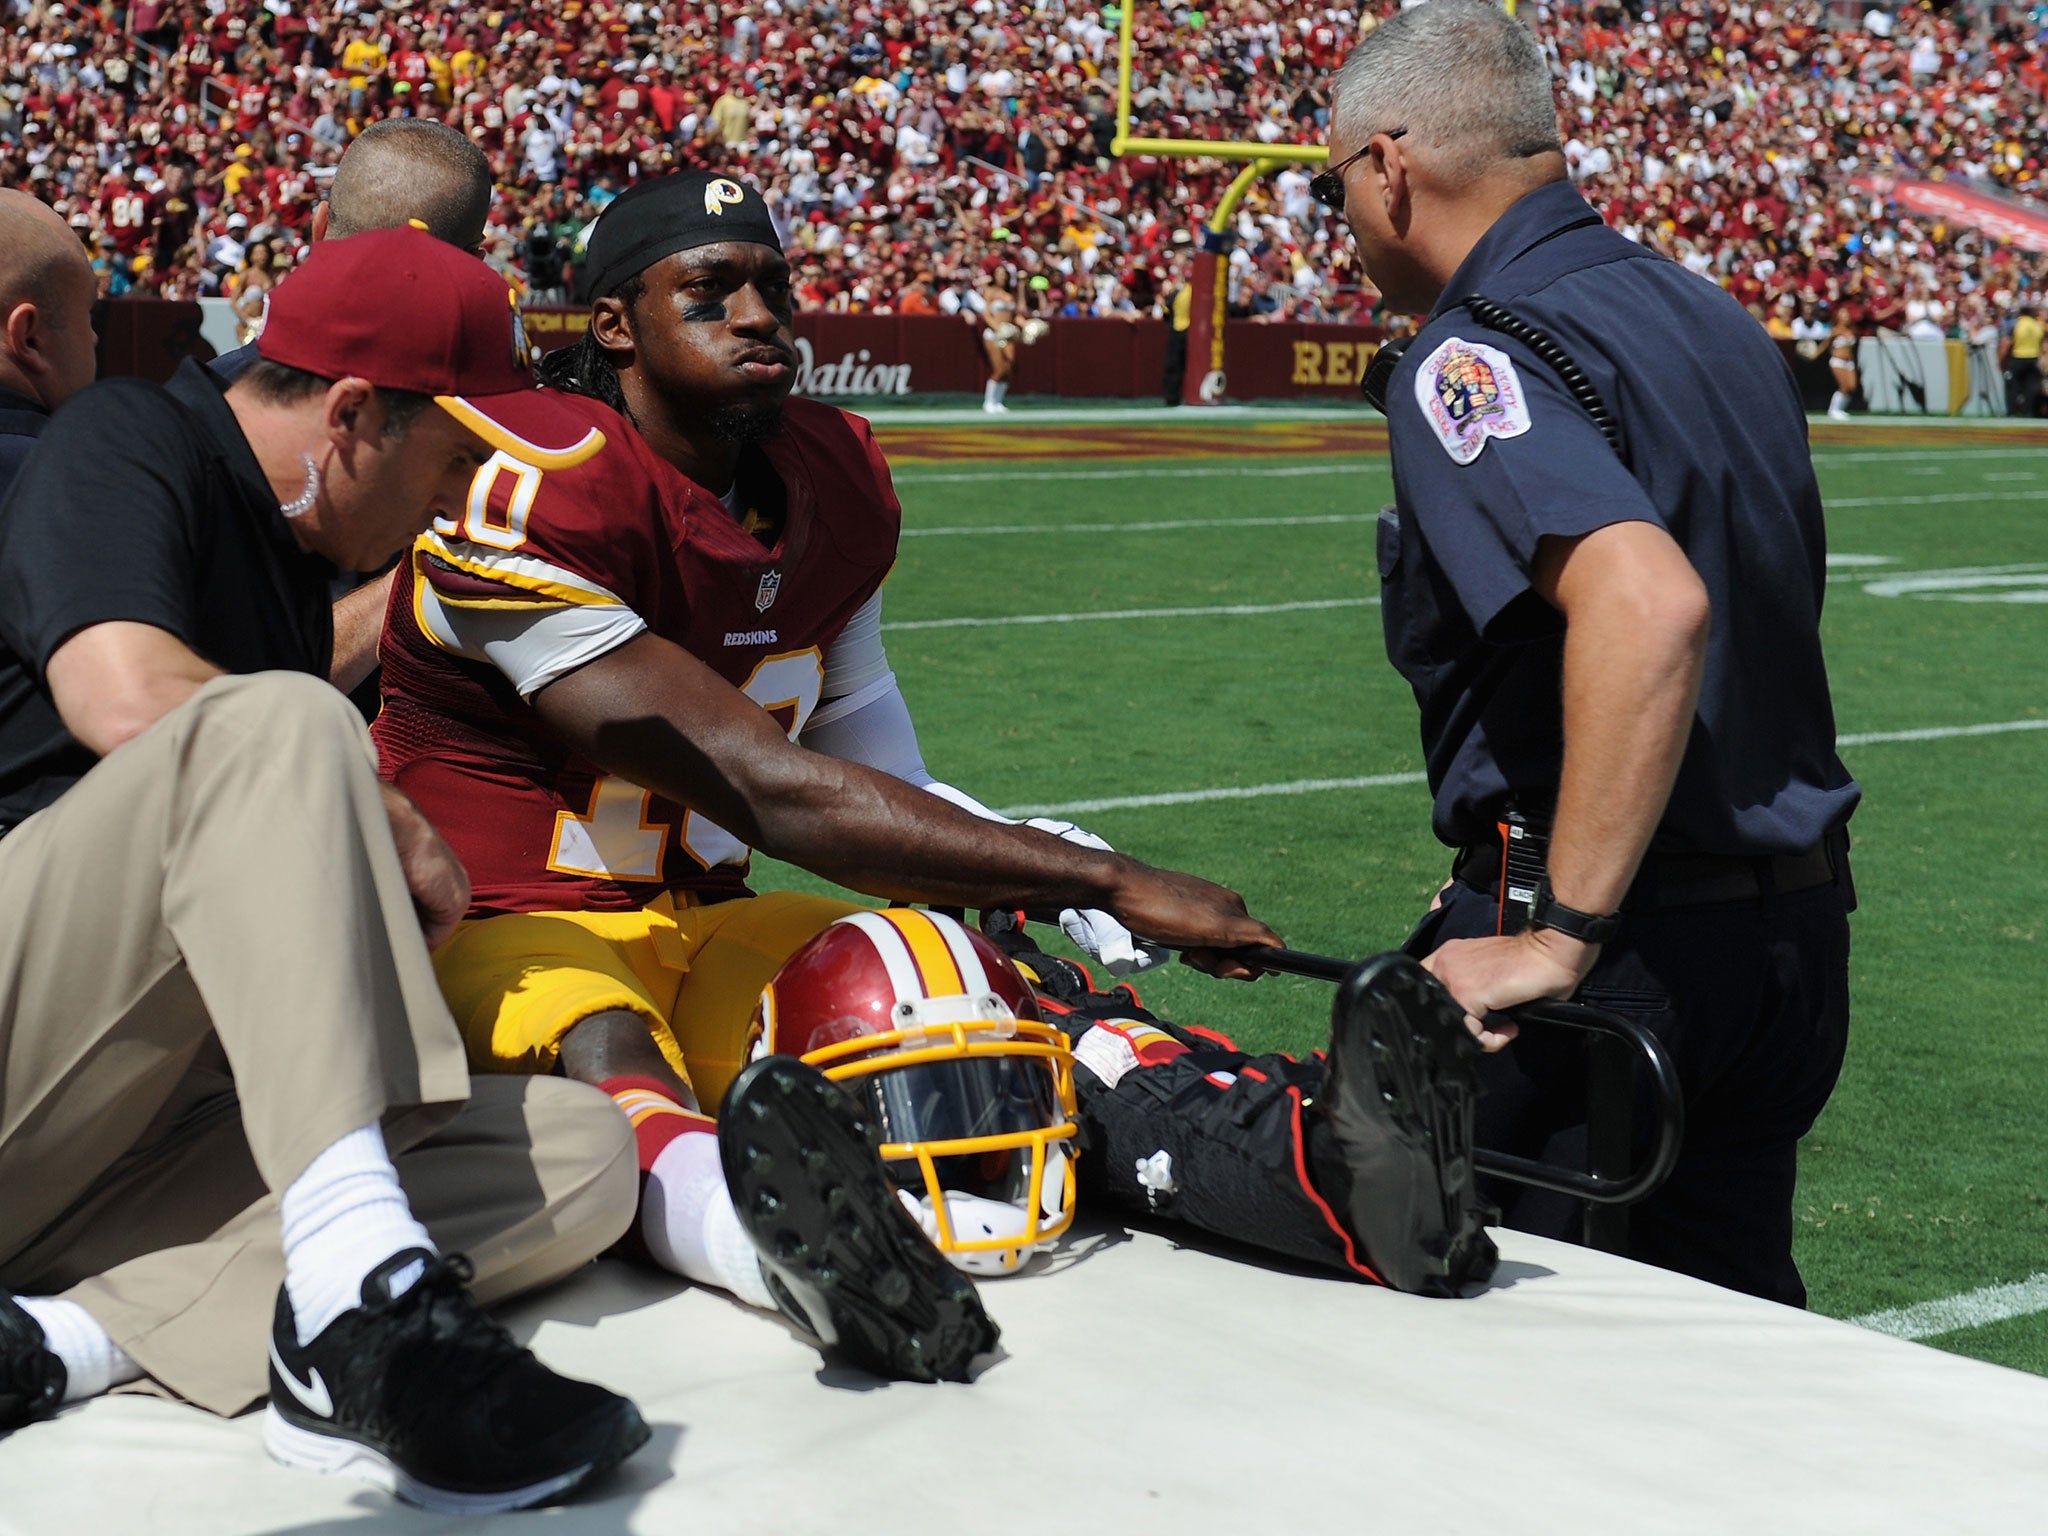 Robert Griffin III is carted off the field after suffering a dislocated ankle